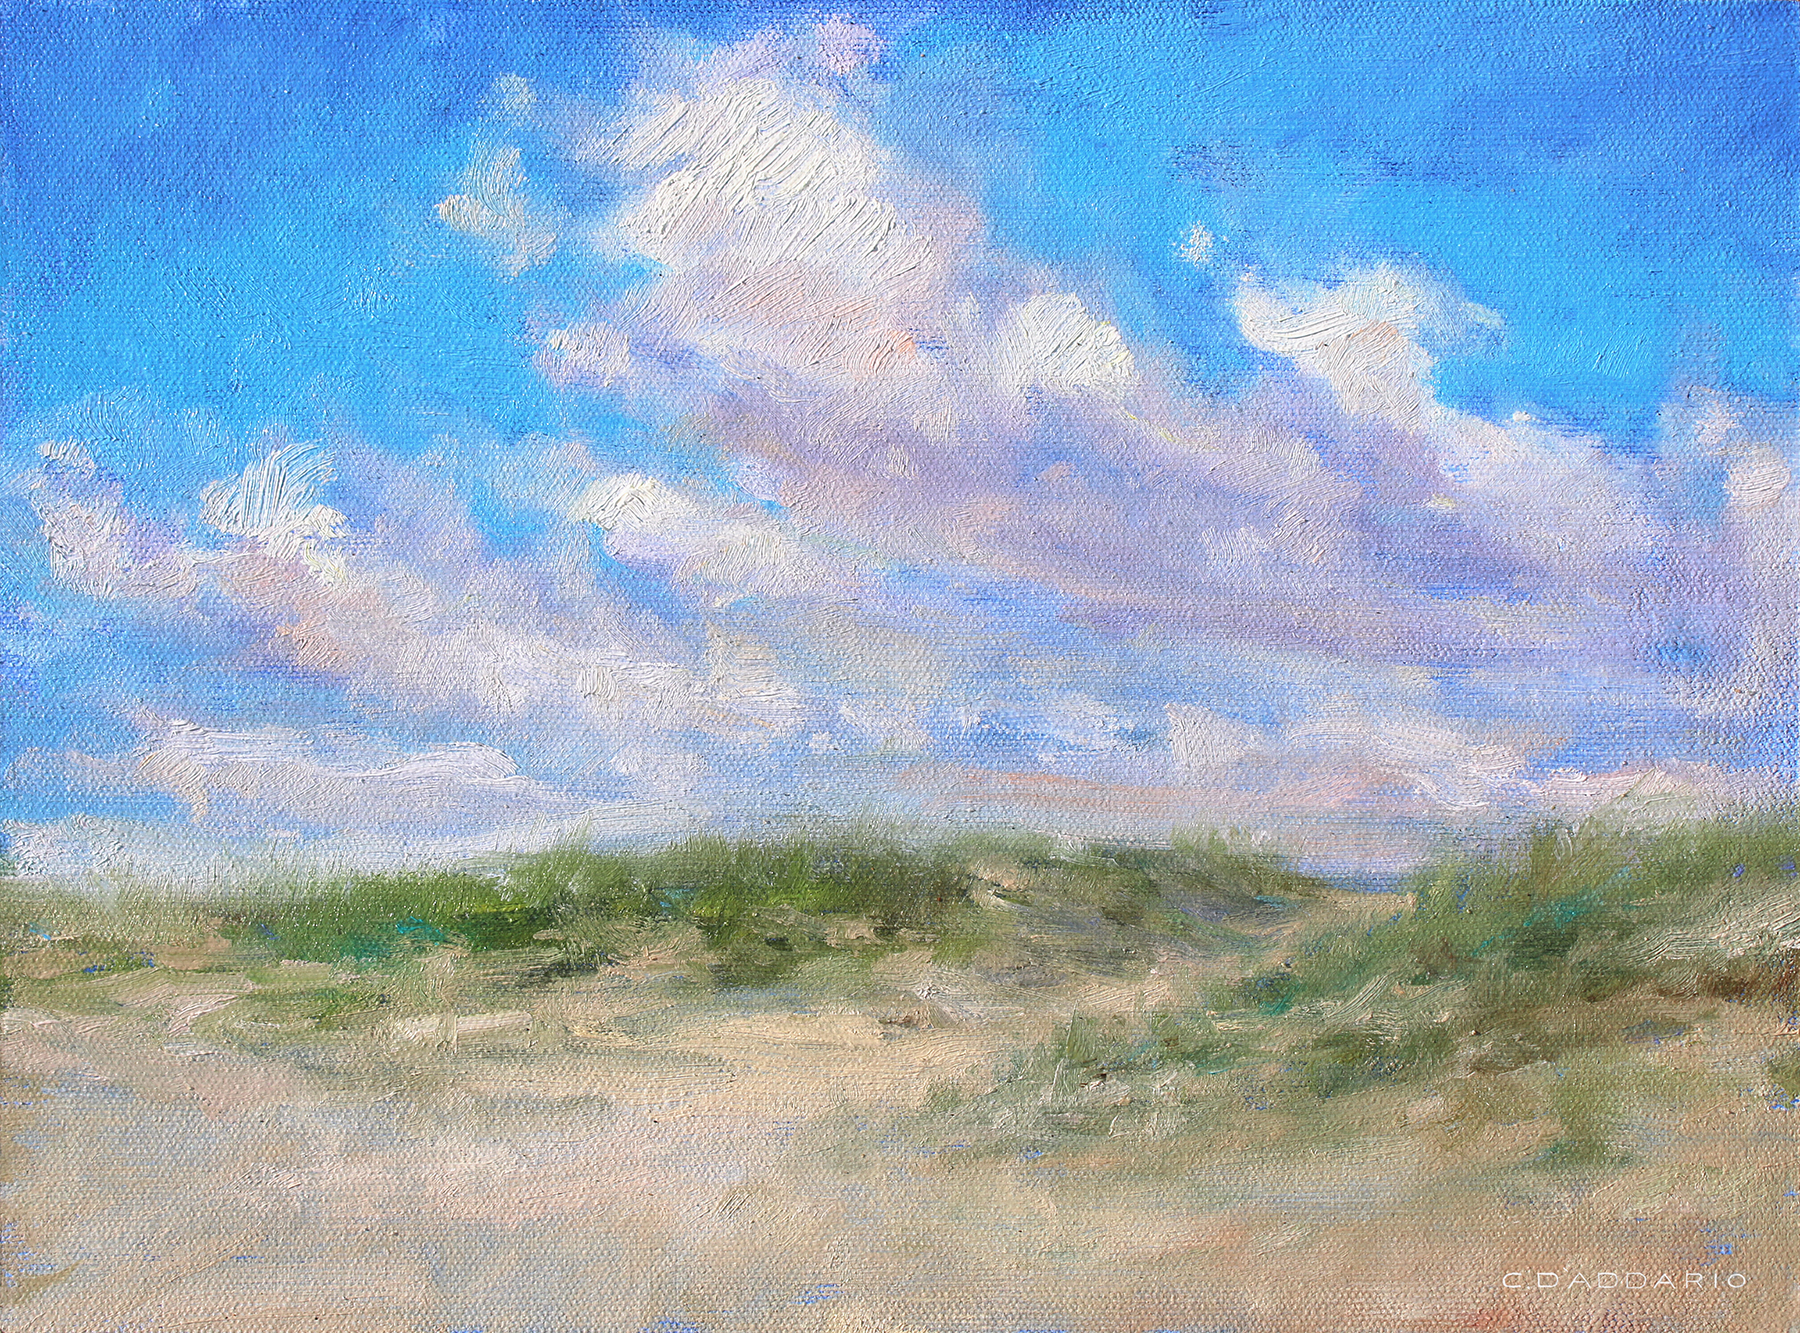 Moving Clouds Over Dune Beach